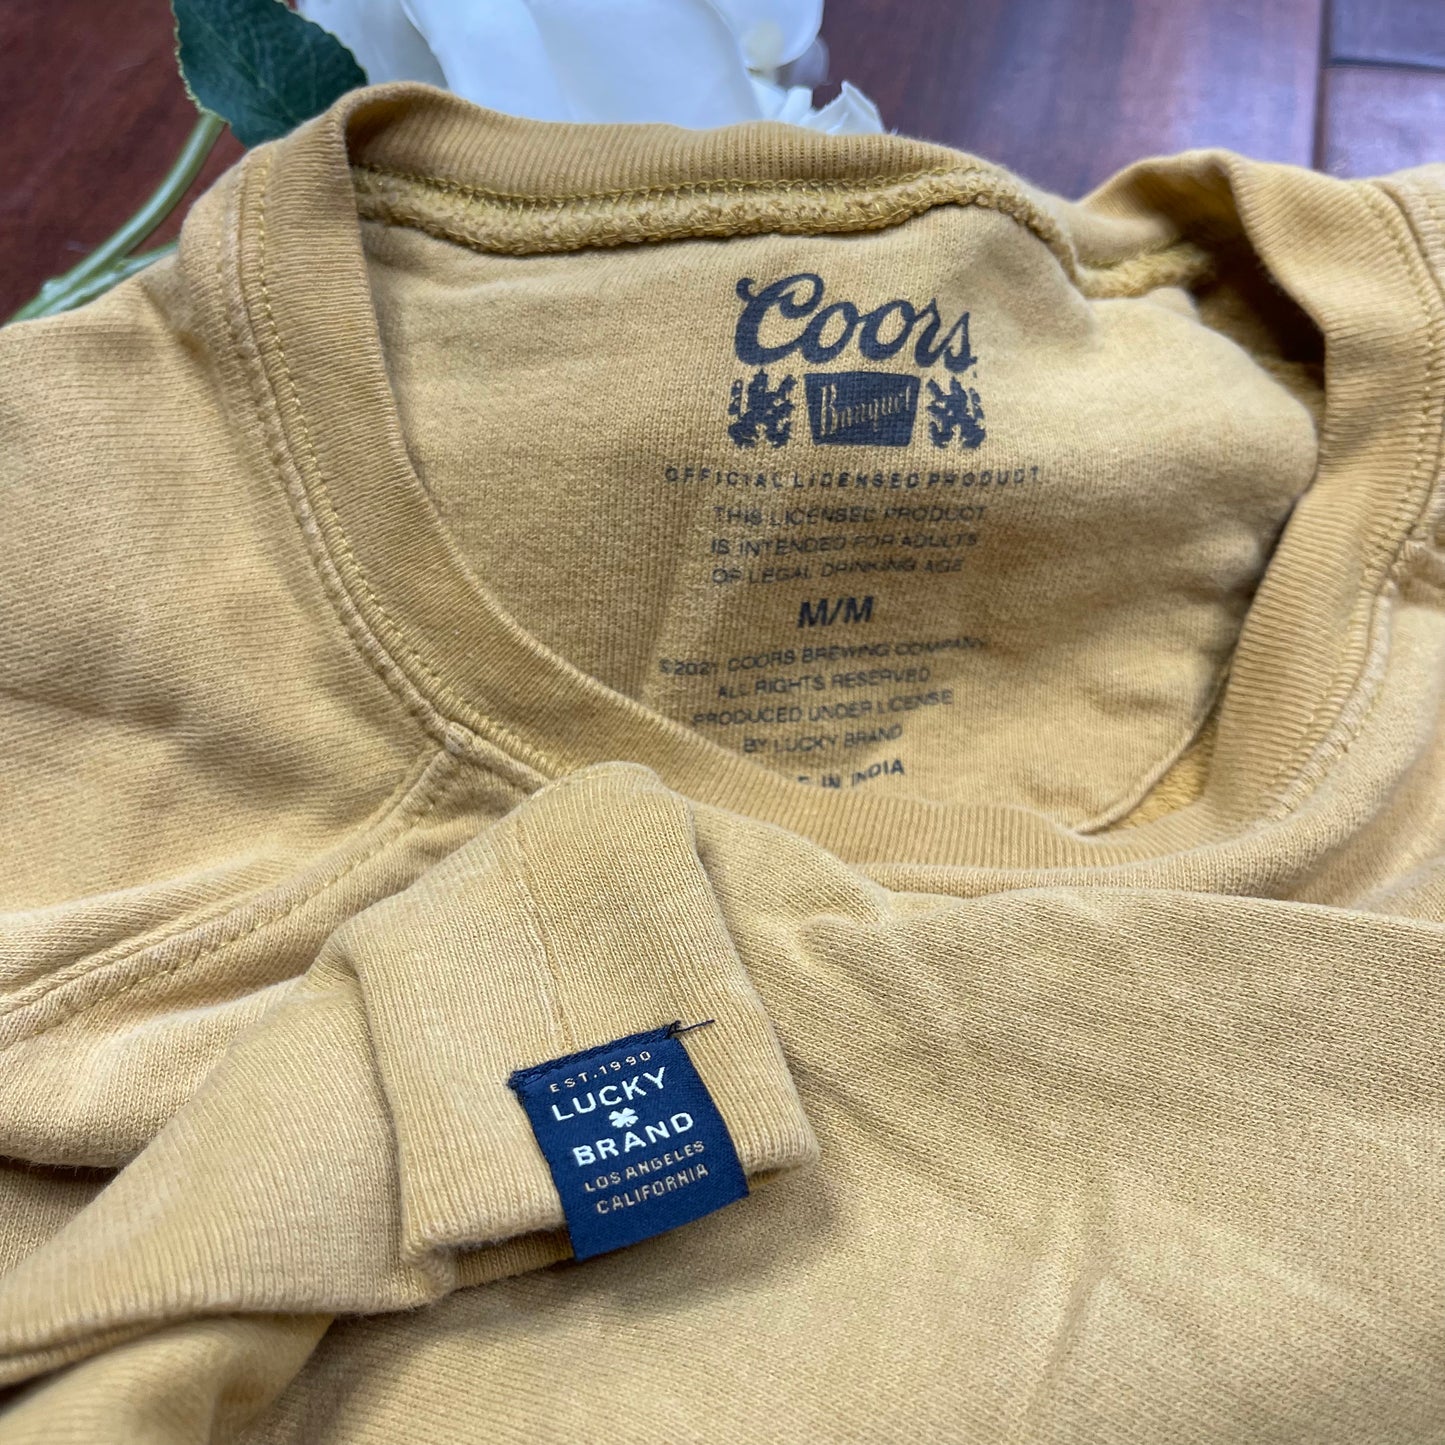 THRIFTED COORS GOLDEN BEER LUCKY BRAND SWEATER